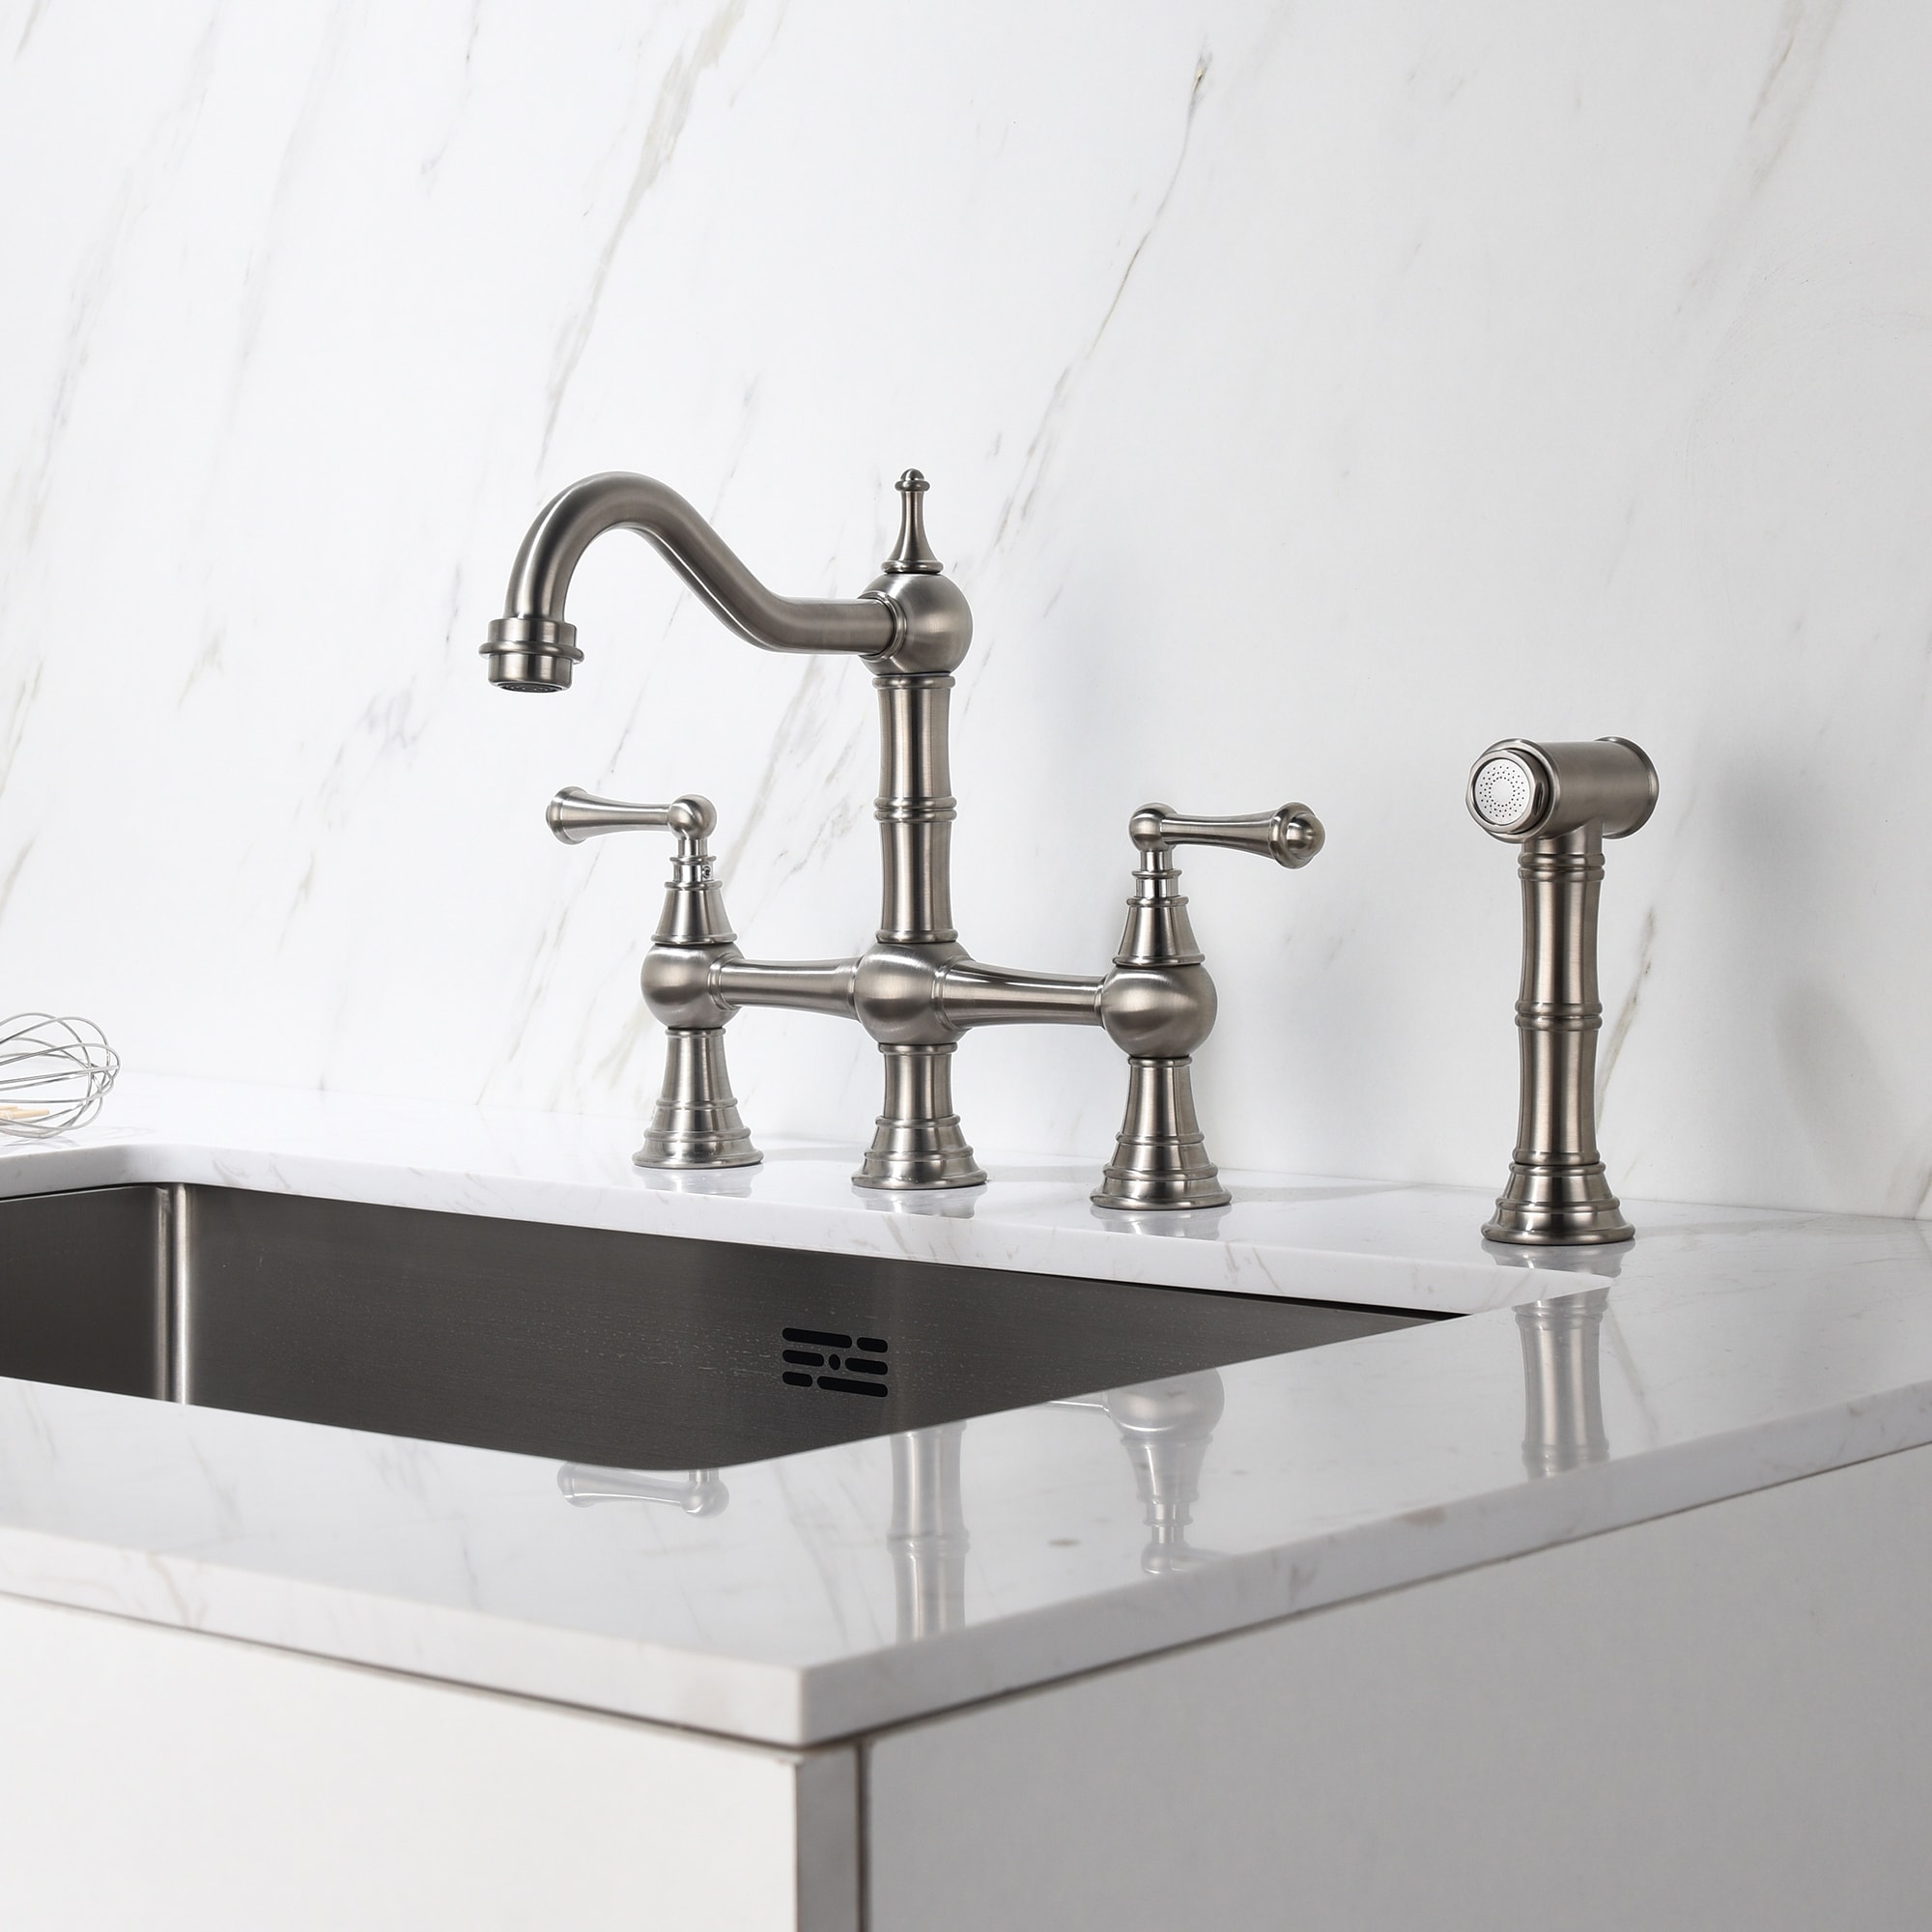 Details about   Bridge Kitchen Faucet Two Handle Side Spray High Arc Spout Sleek Stainless Steel 